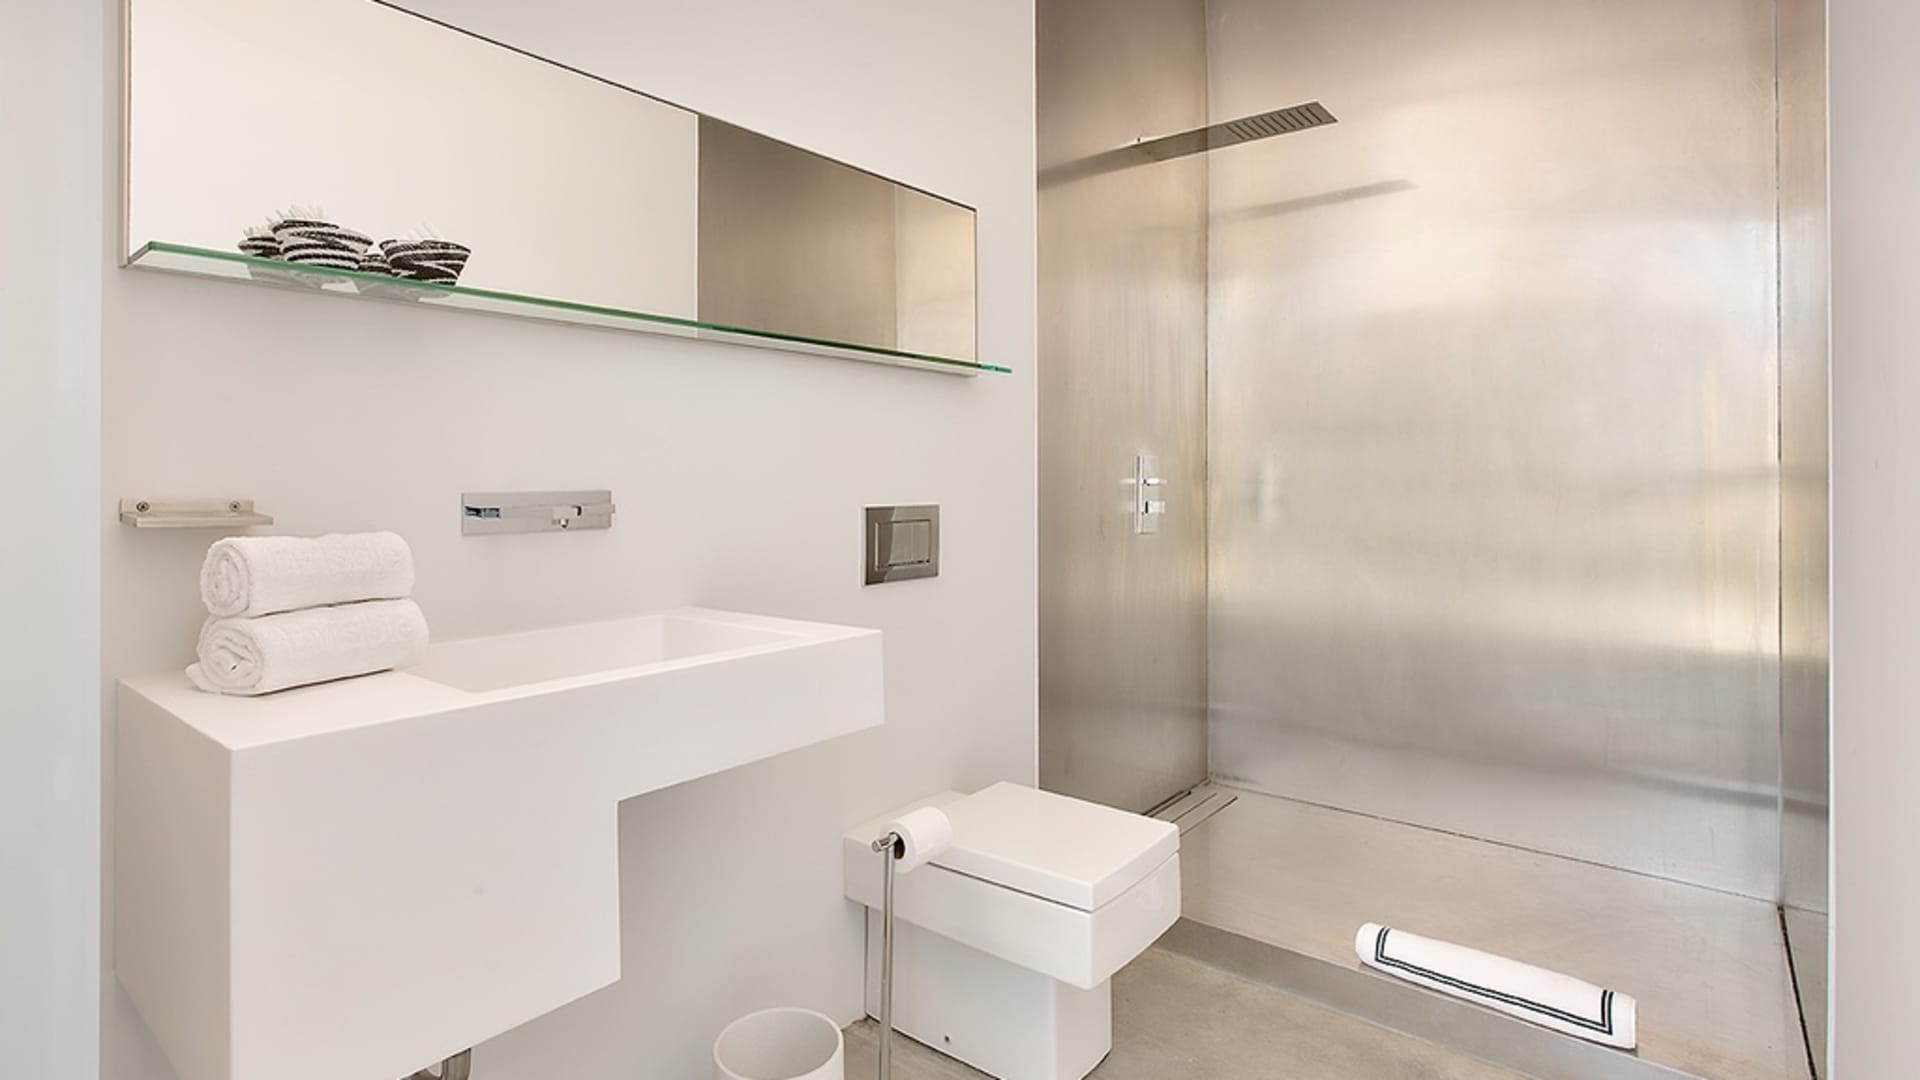 The guest bedroom's minimalist ensuite bath includes cement floors and a stainless steel shower.